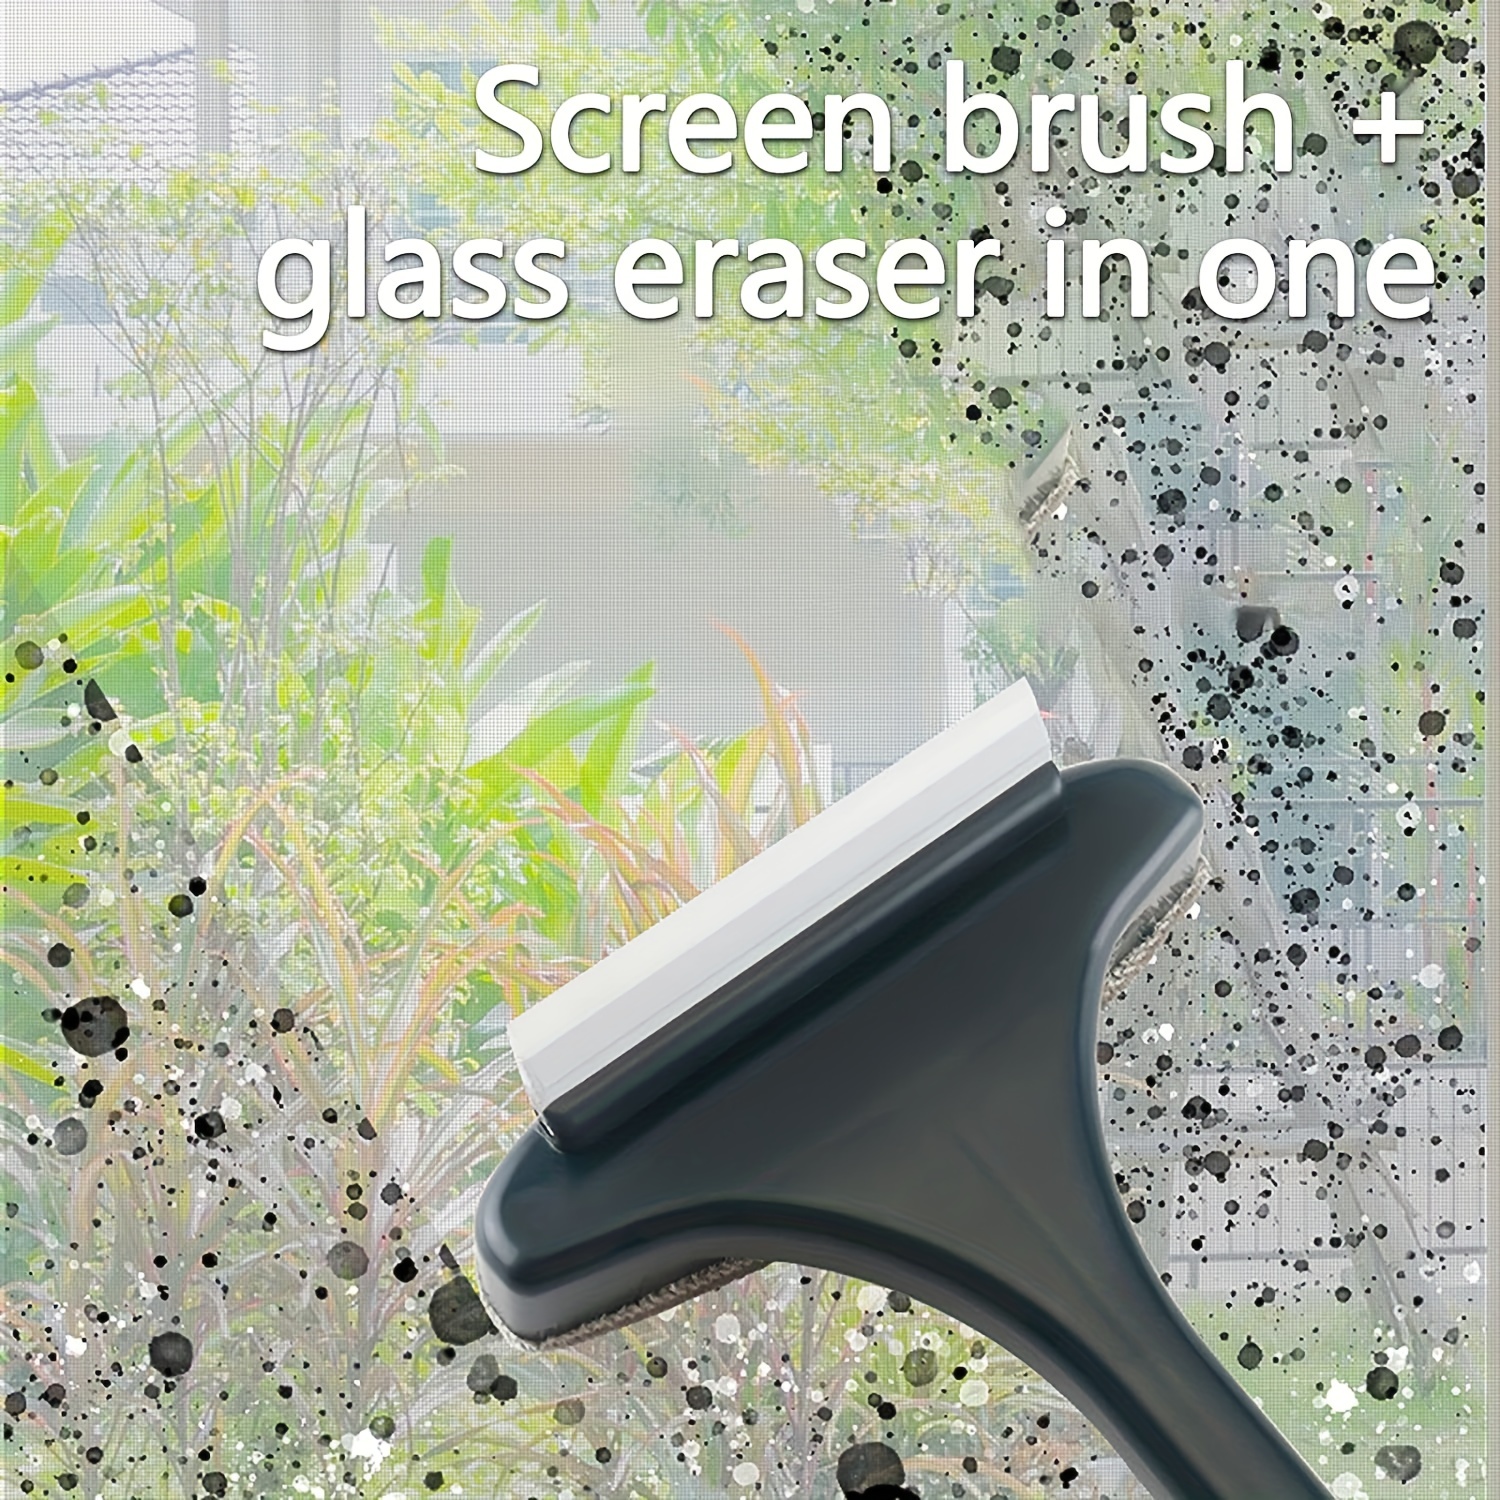 Mesh Screen Cleaner, Window Screen Cleaning Brush Washing Equipment,  Detachable Window Cleaner Tool with Wet and Dry Dual-Use